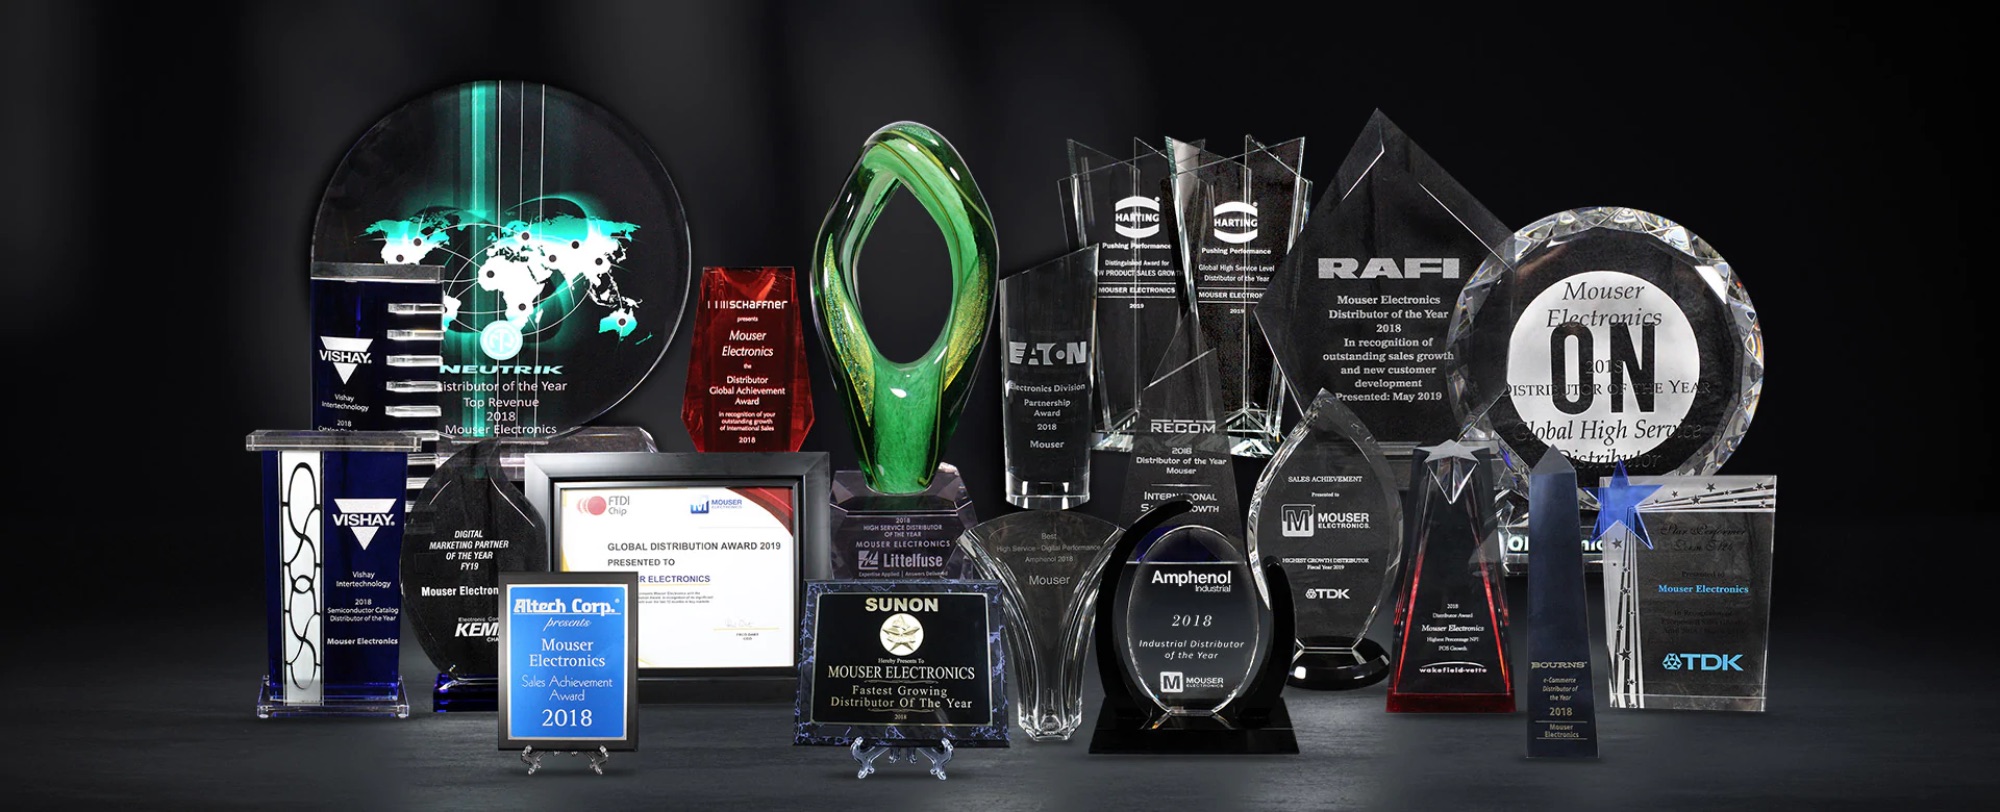 July 2019 Connector Industry News - Award News - Mouser Electronics